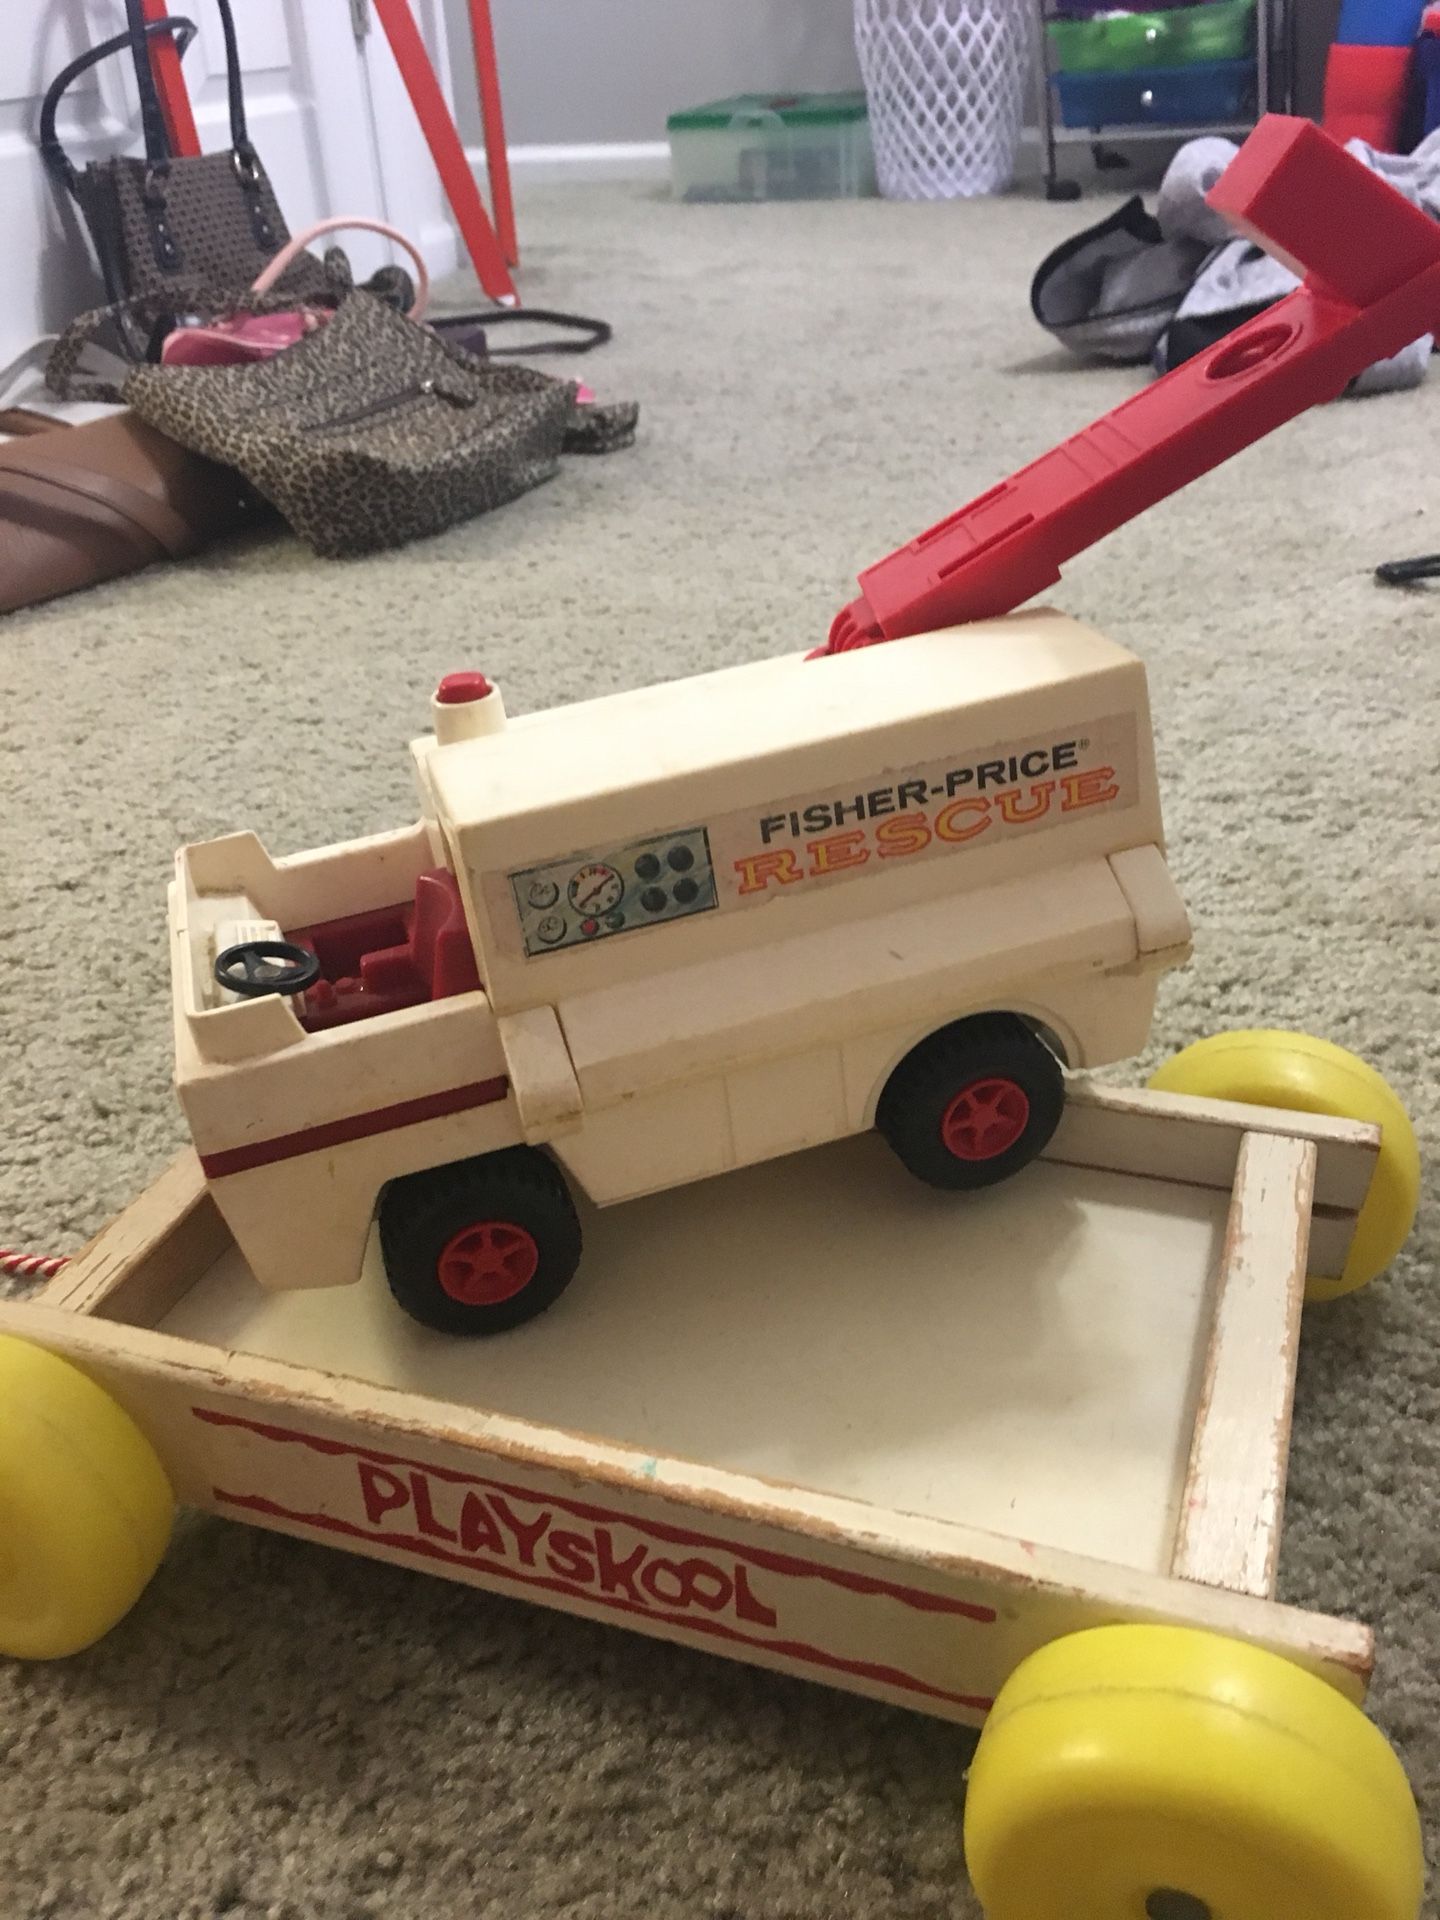 Vintage 1974 Fisher Price Fire truck & vintage Playscool wagon Lithograph Tin Toy